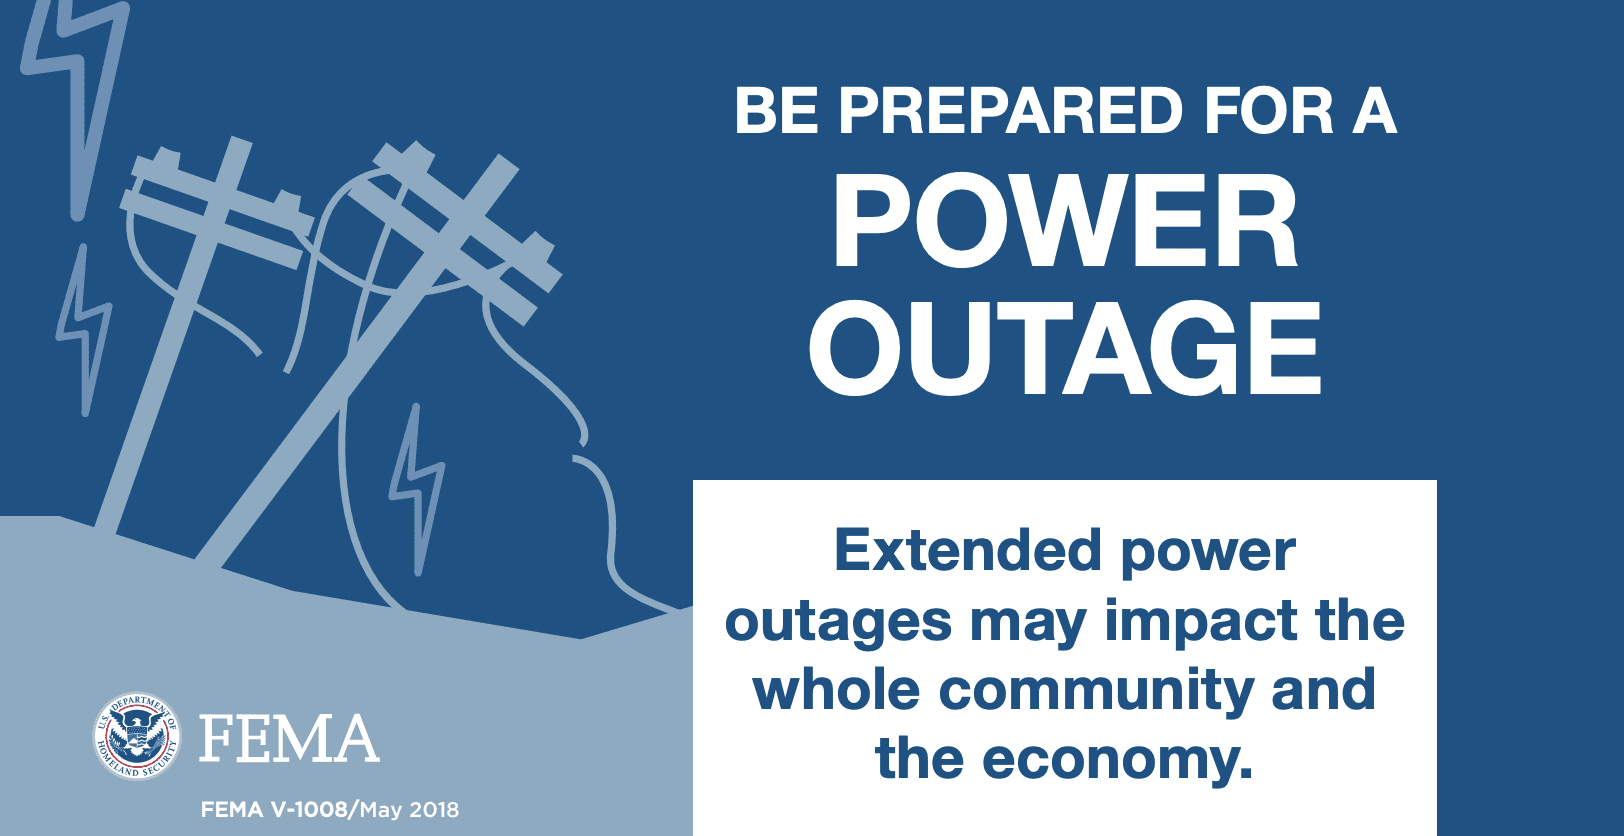 https://www.childcareaware.org/wp-content/uploads/2020/09/fema-outage.png